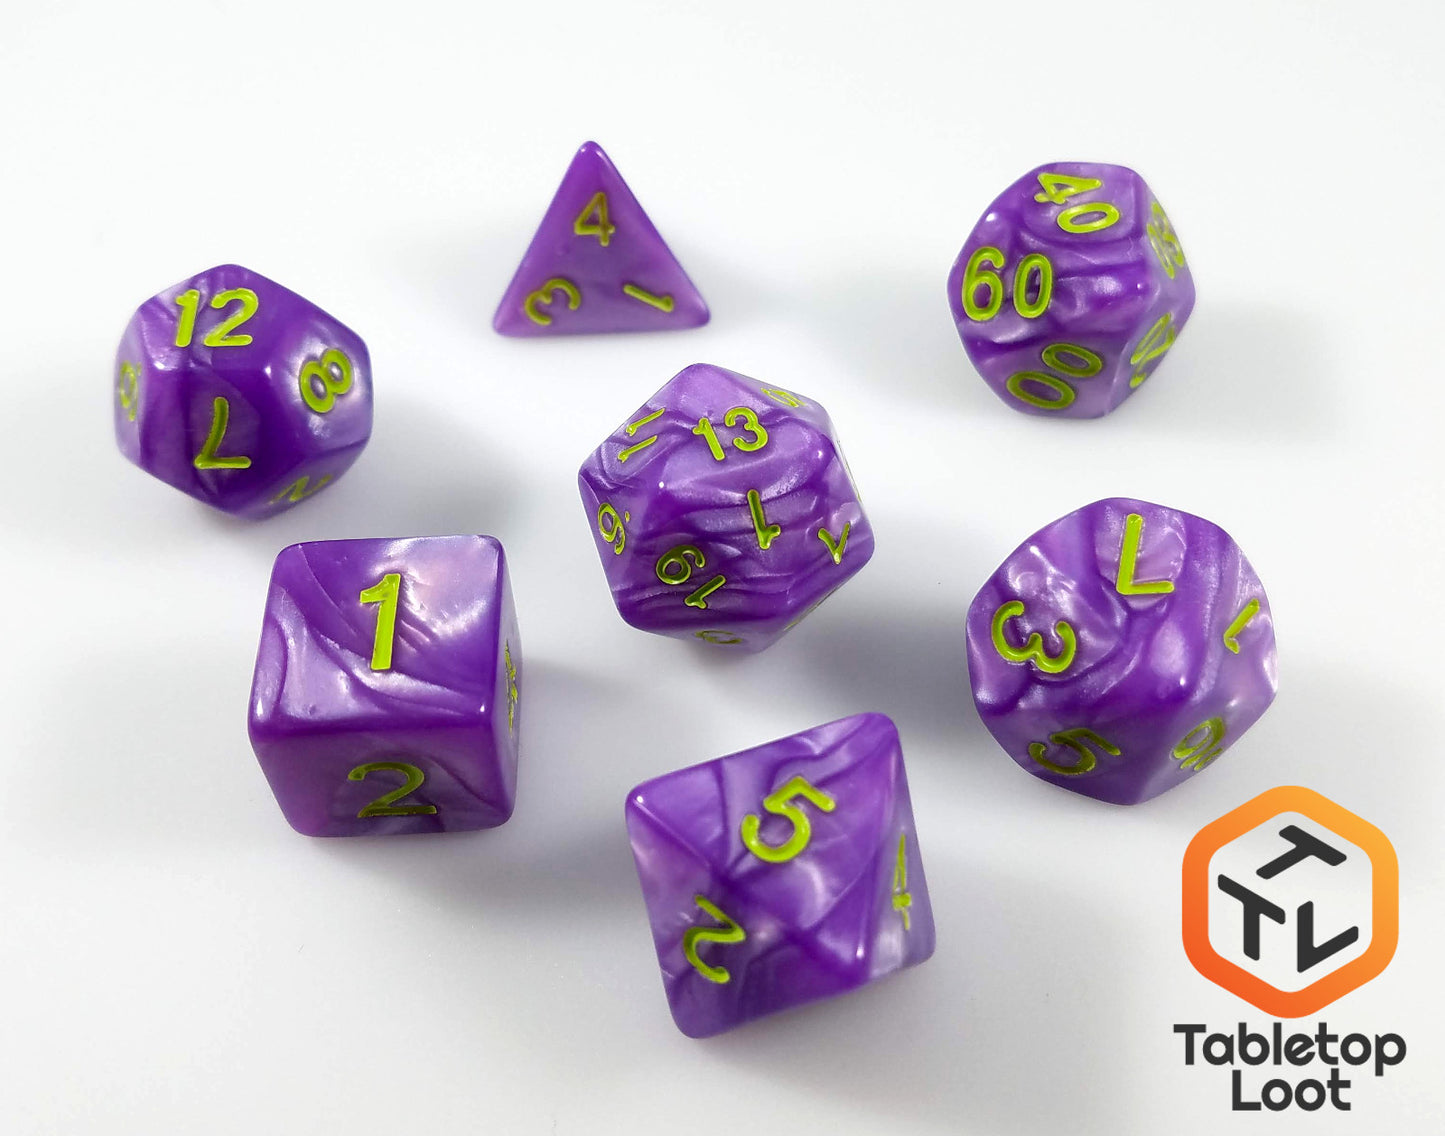 The Joker's Wild 7 piece dice set from Tabletop Loot with swirls of pearlescent purple and bright green numbering.